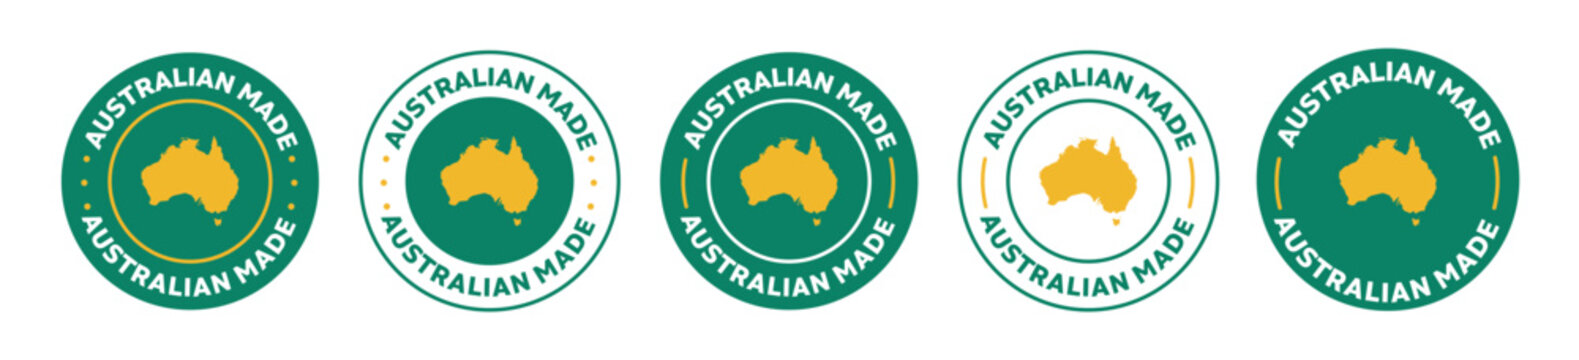 australian made icon set. made in australia. australian made product icon suitable for commerce business. badge, seal, sticker, logo, and symbol Variants. Isolated vector illustration